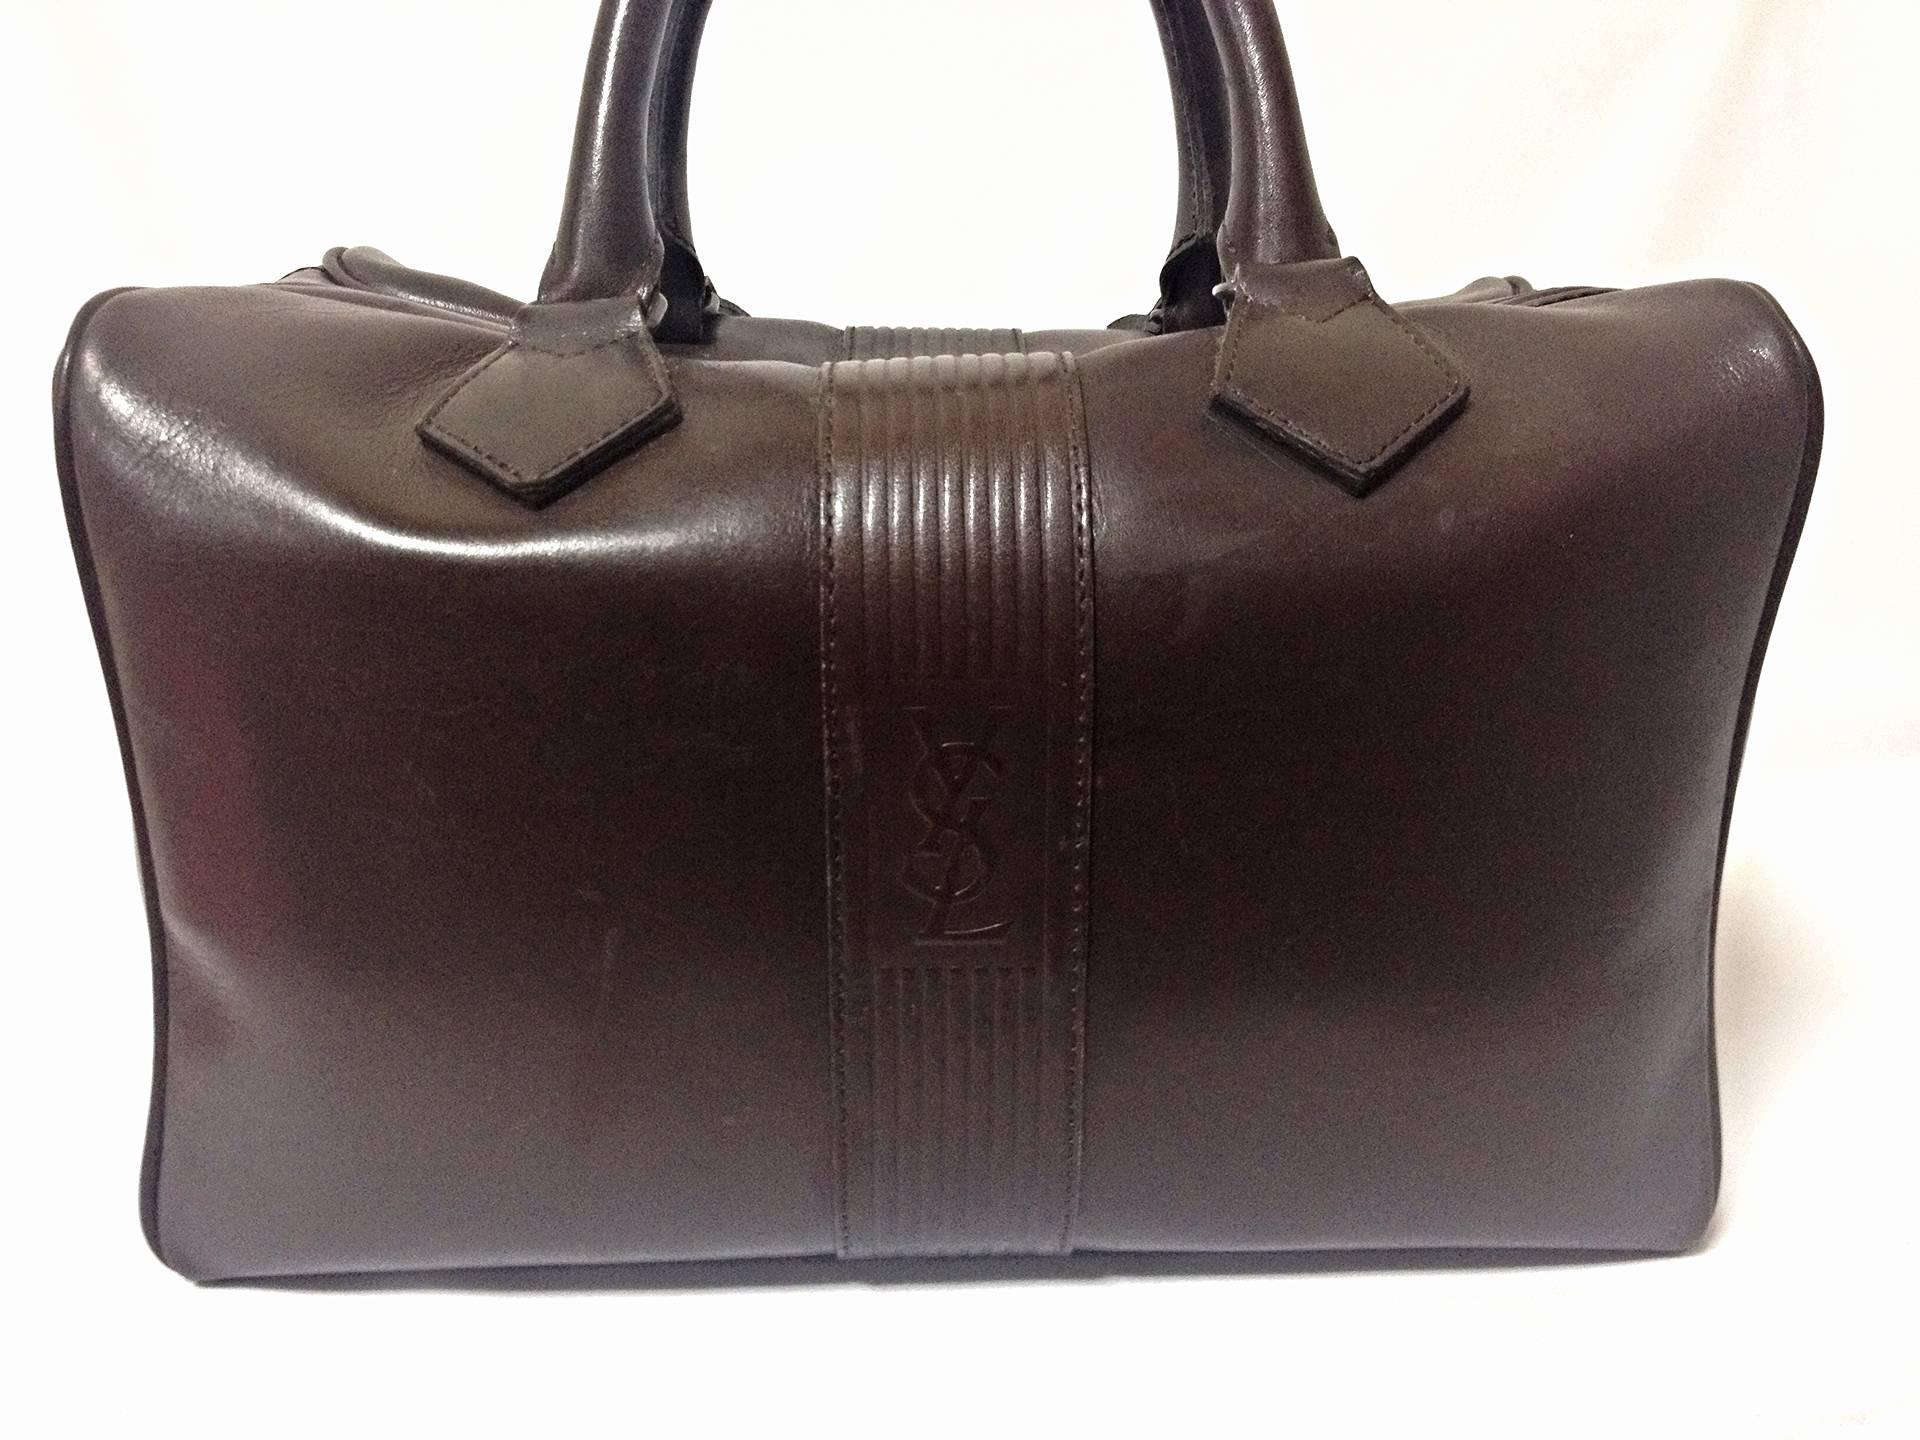 This is a vintage classic design leather handbag/mini duffle bag from Yves Saint Laurent in approximately from the late 80's through the early 90's. 
Great to be one of your daily-use bags as well as a few day travel bag.

Featuring its iconic